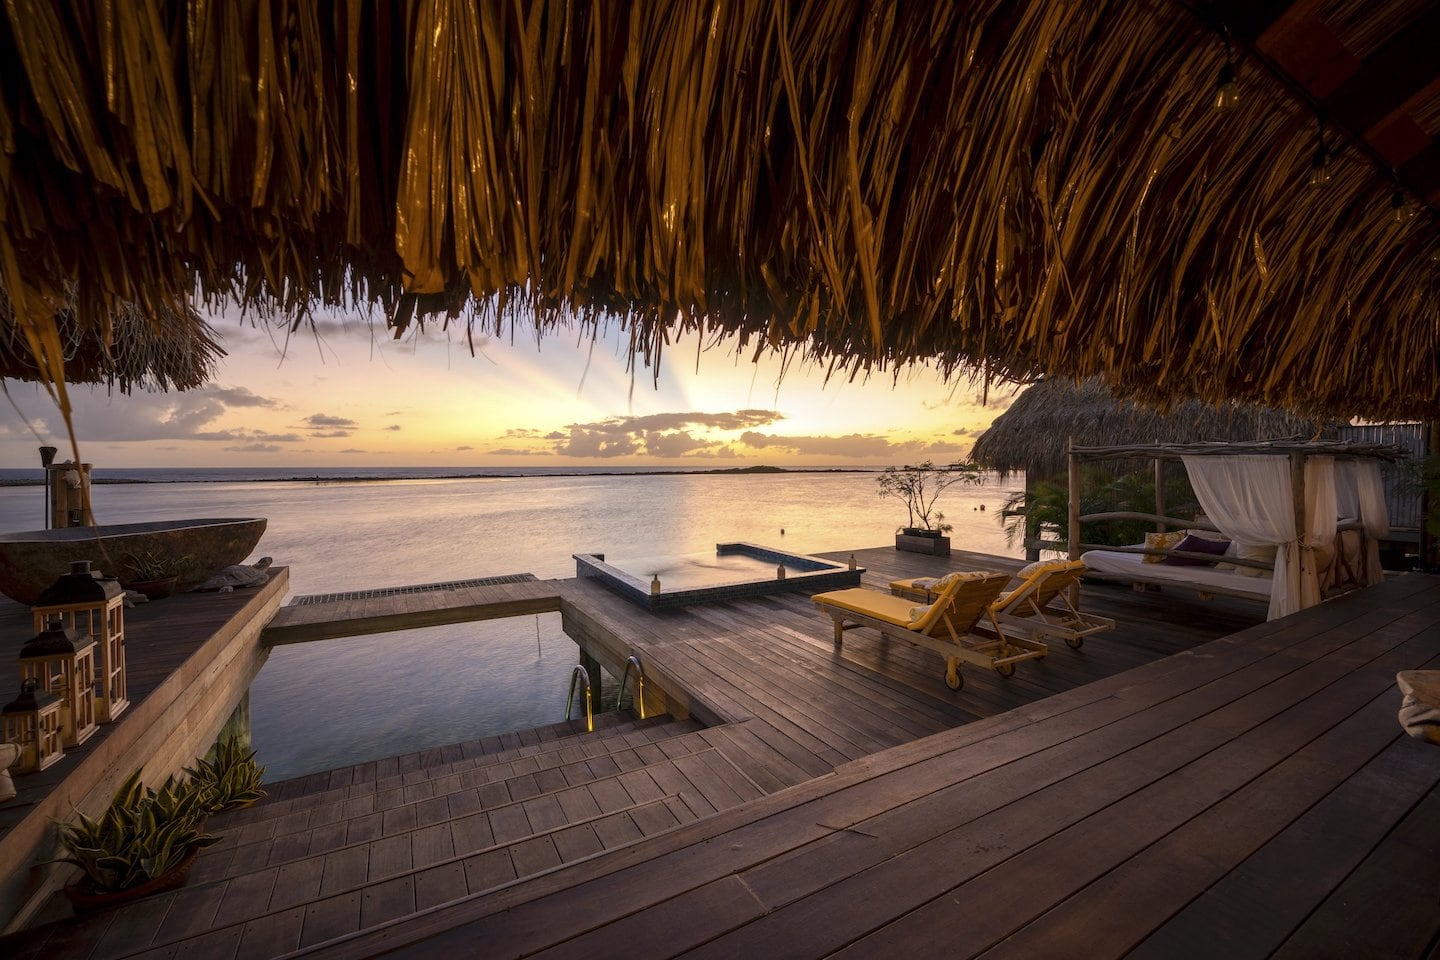 view from luxury overwater bungalow in Caribbean